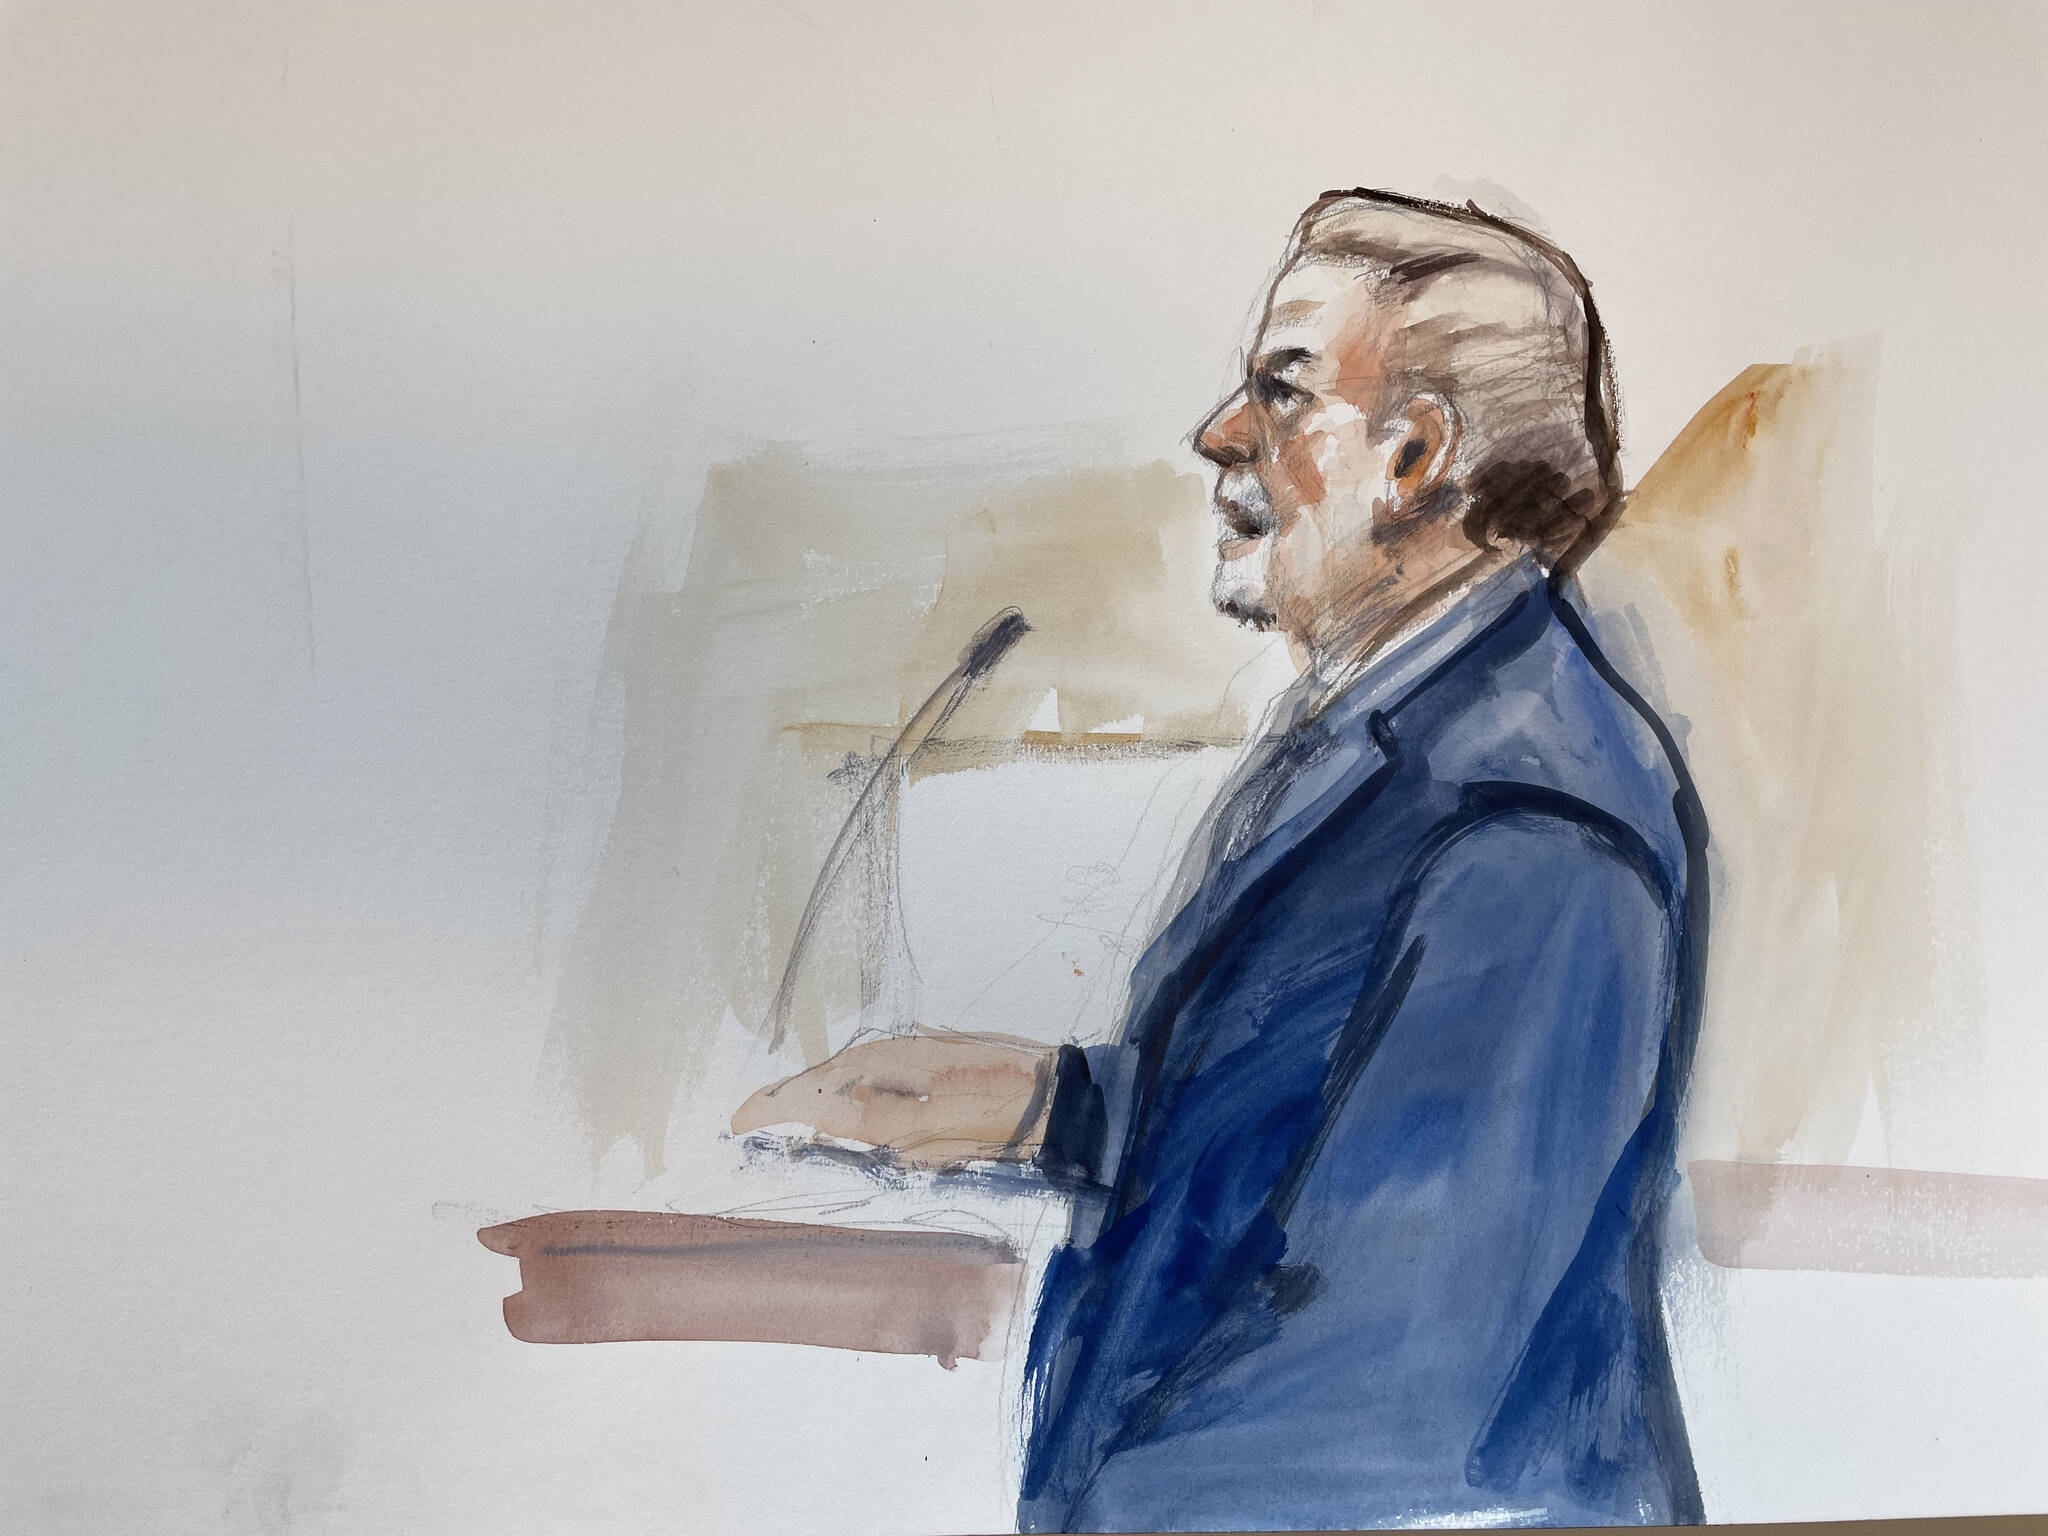 Attorney John Henry Browne represents Allan Thomas in the drainage district trial. Sketch by Seattle-based artist Lois Silver.